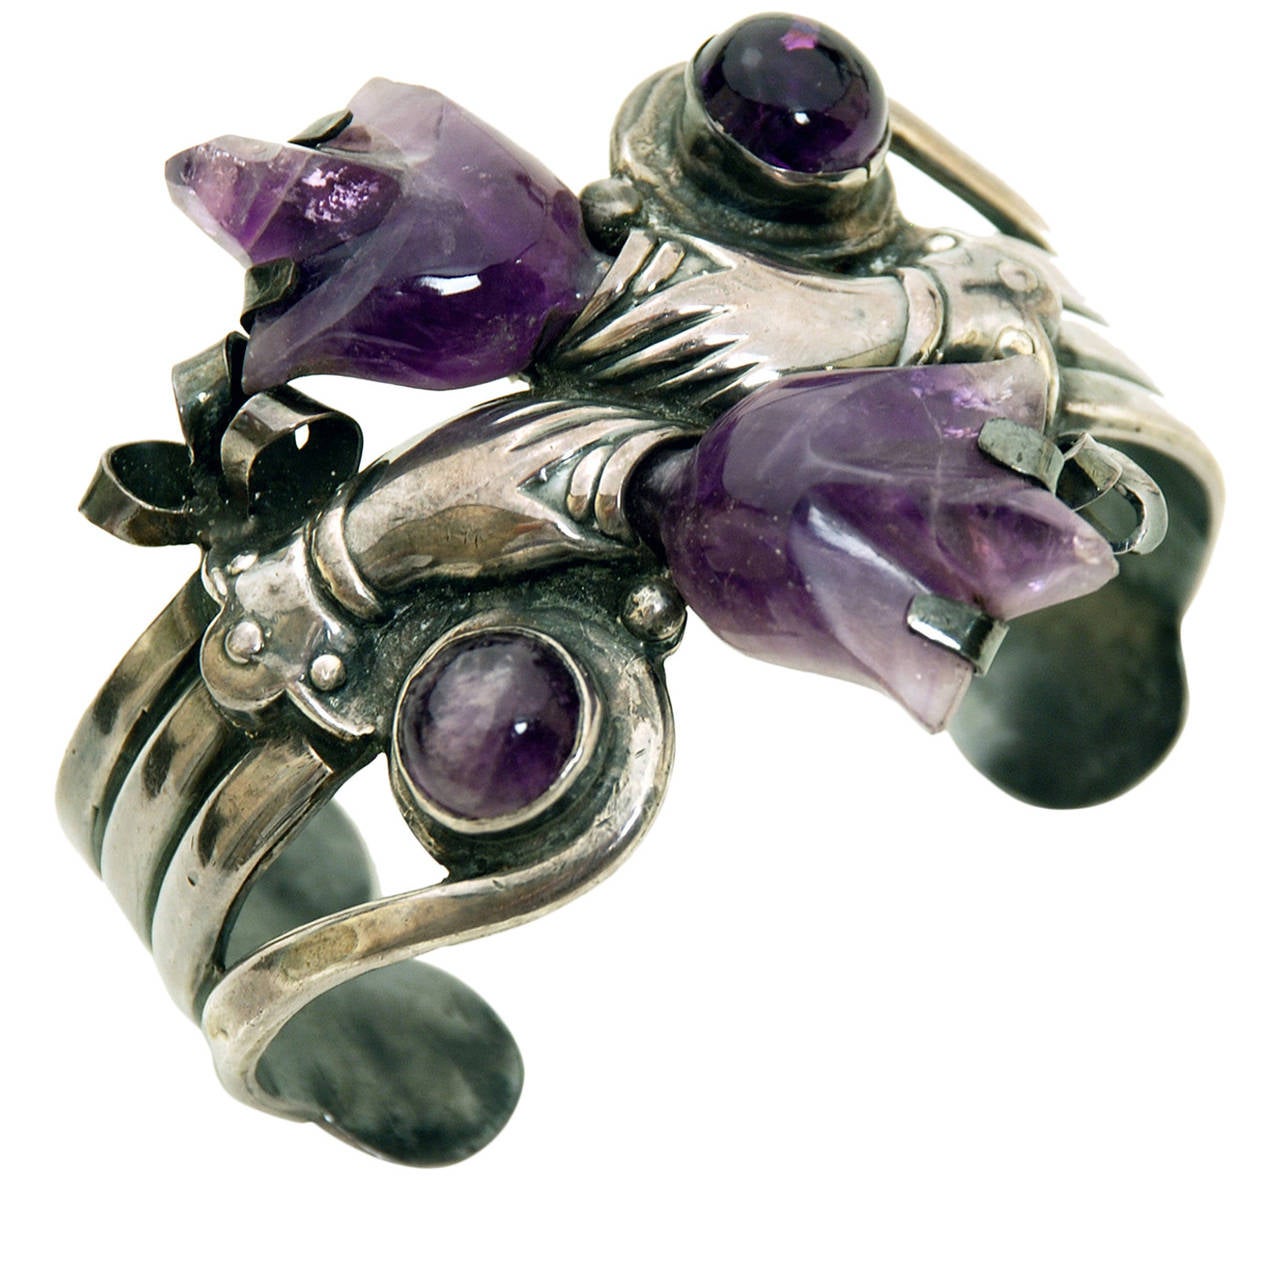 Vintage Mexican Silver and Amethyst Cuff Bracelet, circa 1940s For Sale